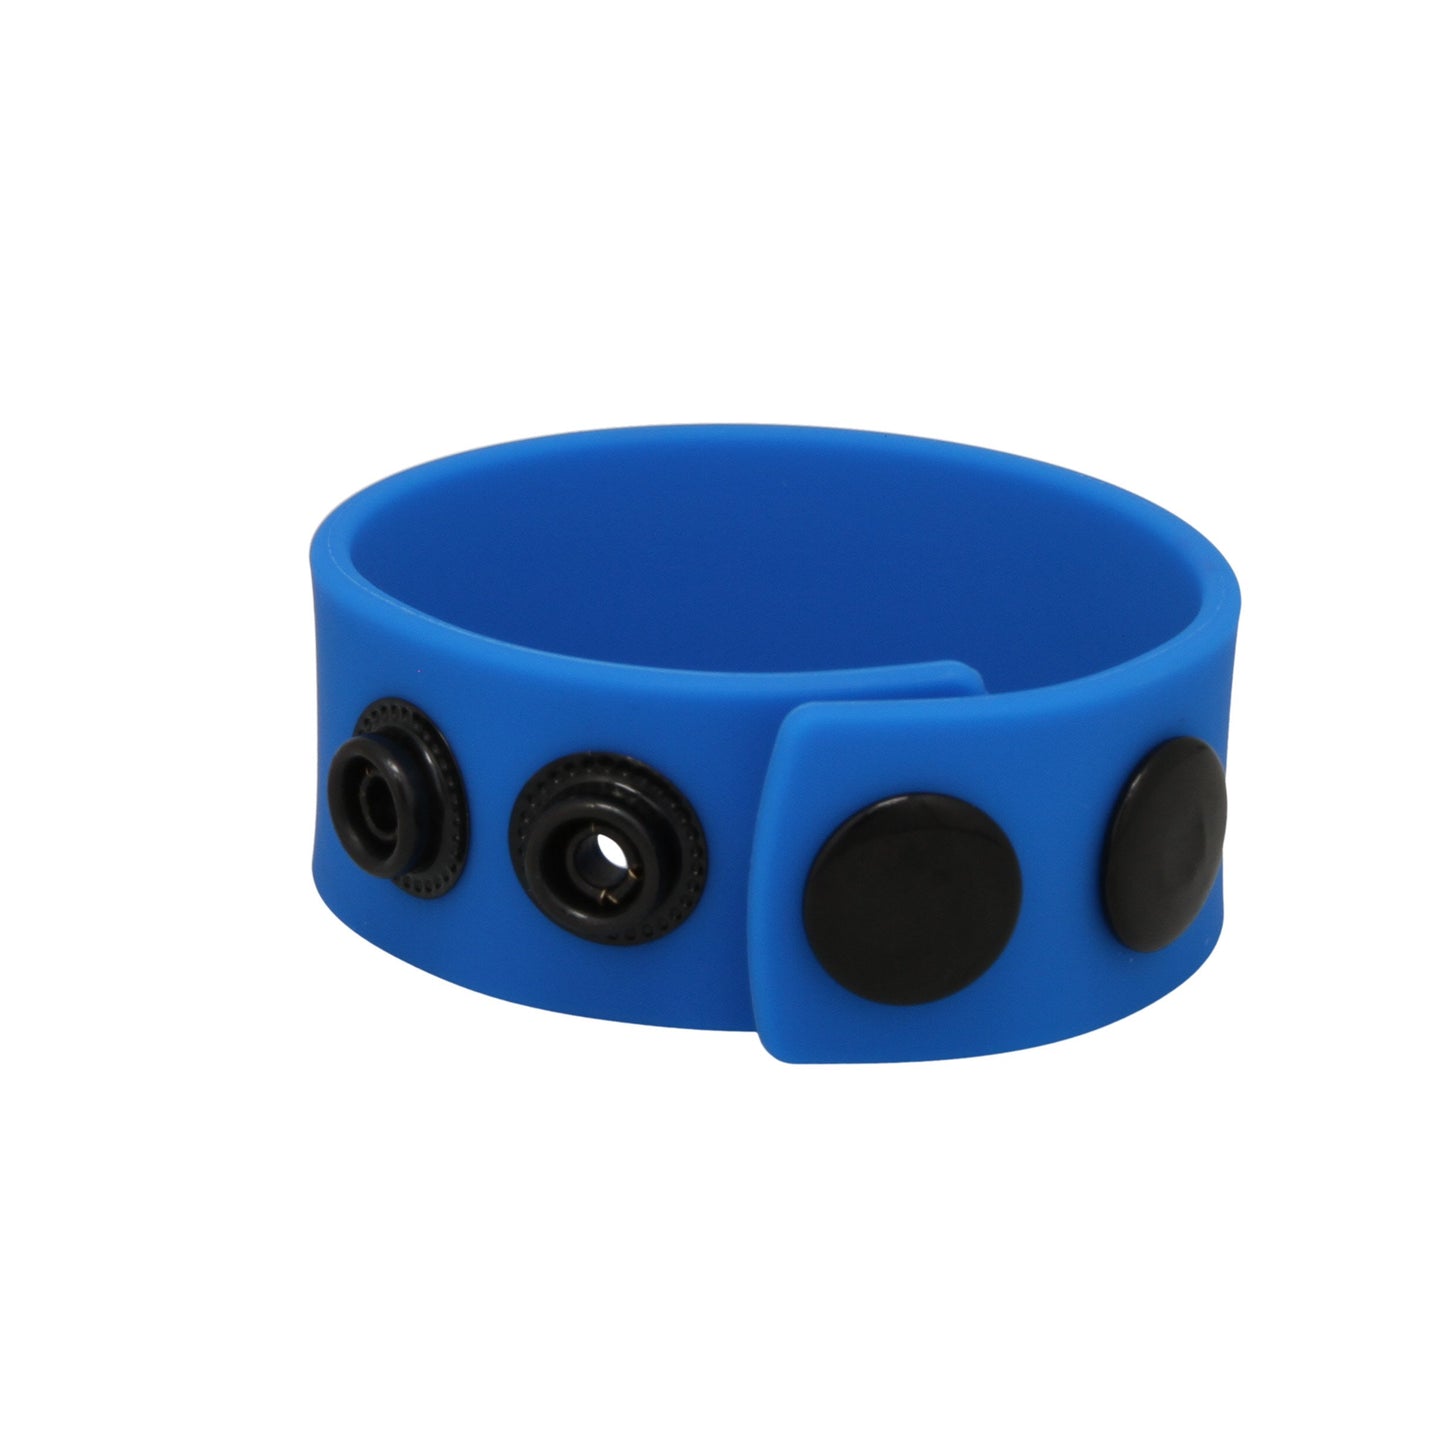 The VIP Adjustable Cock Ring - Blue